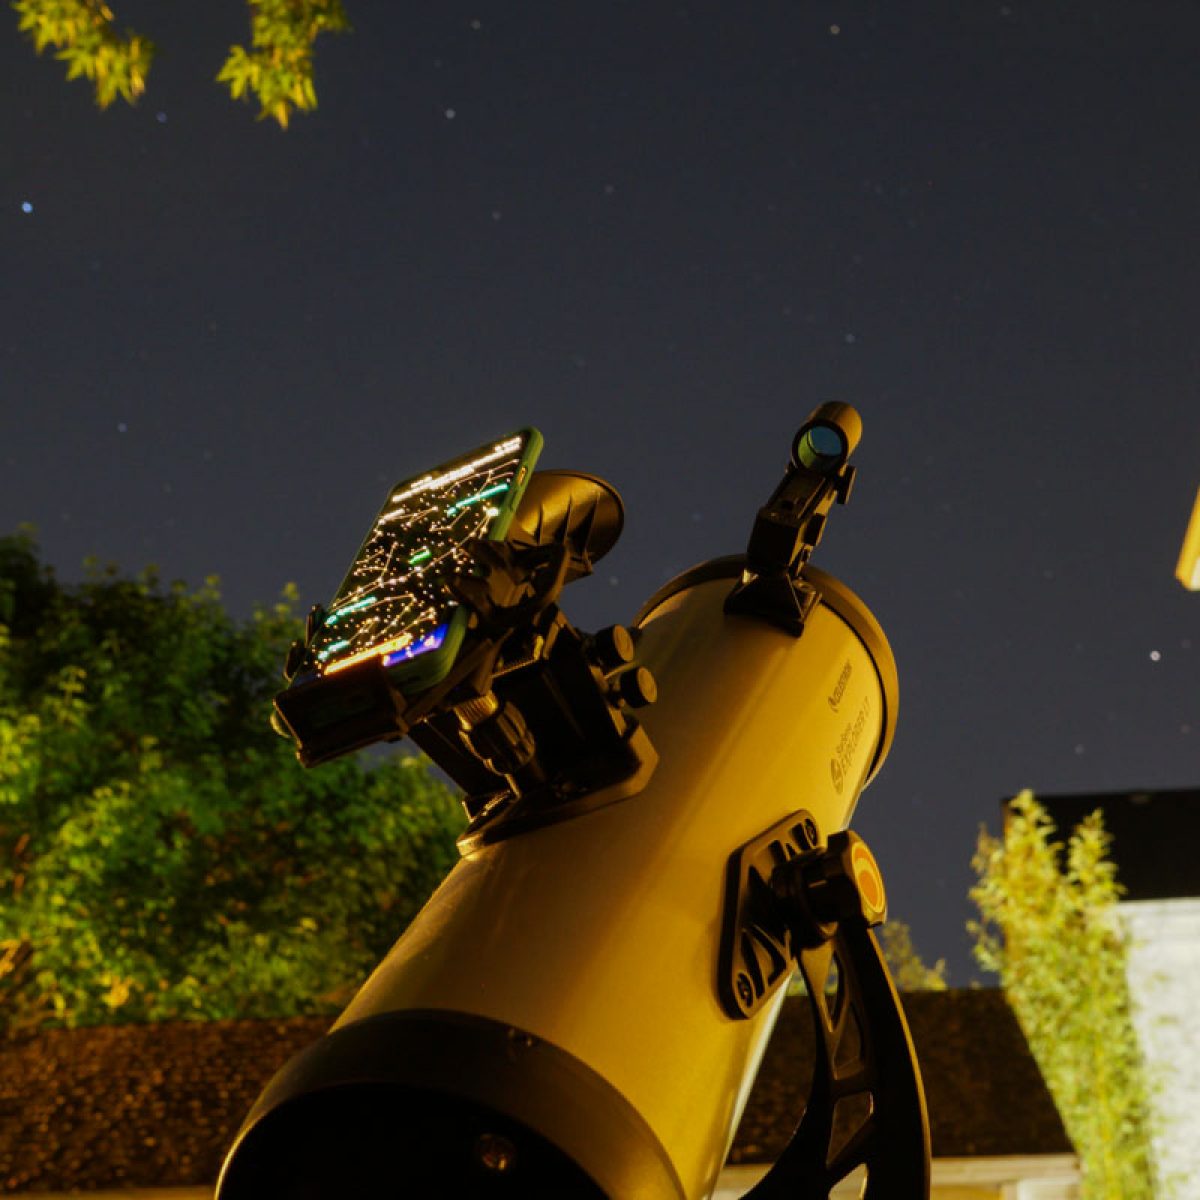 Celestron S Starsense Explorer Is Perfect For Nights Stuck At Home